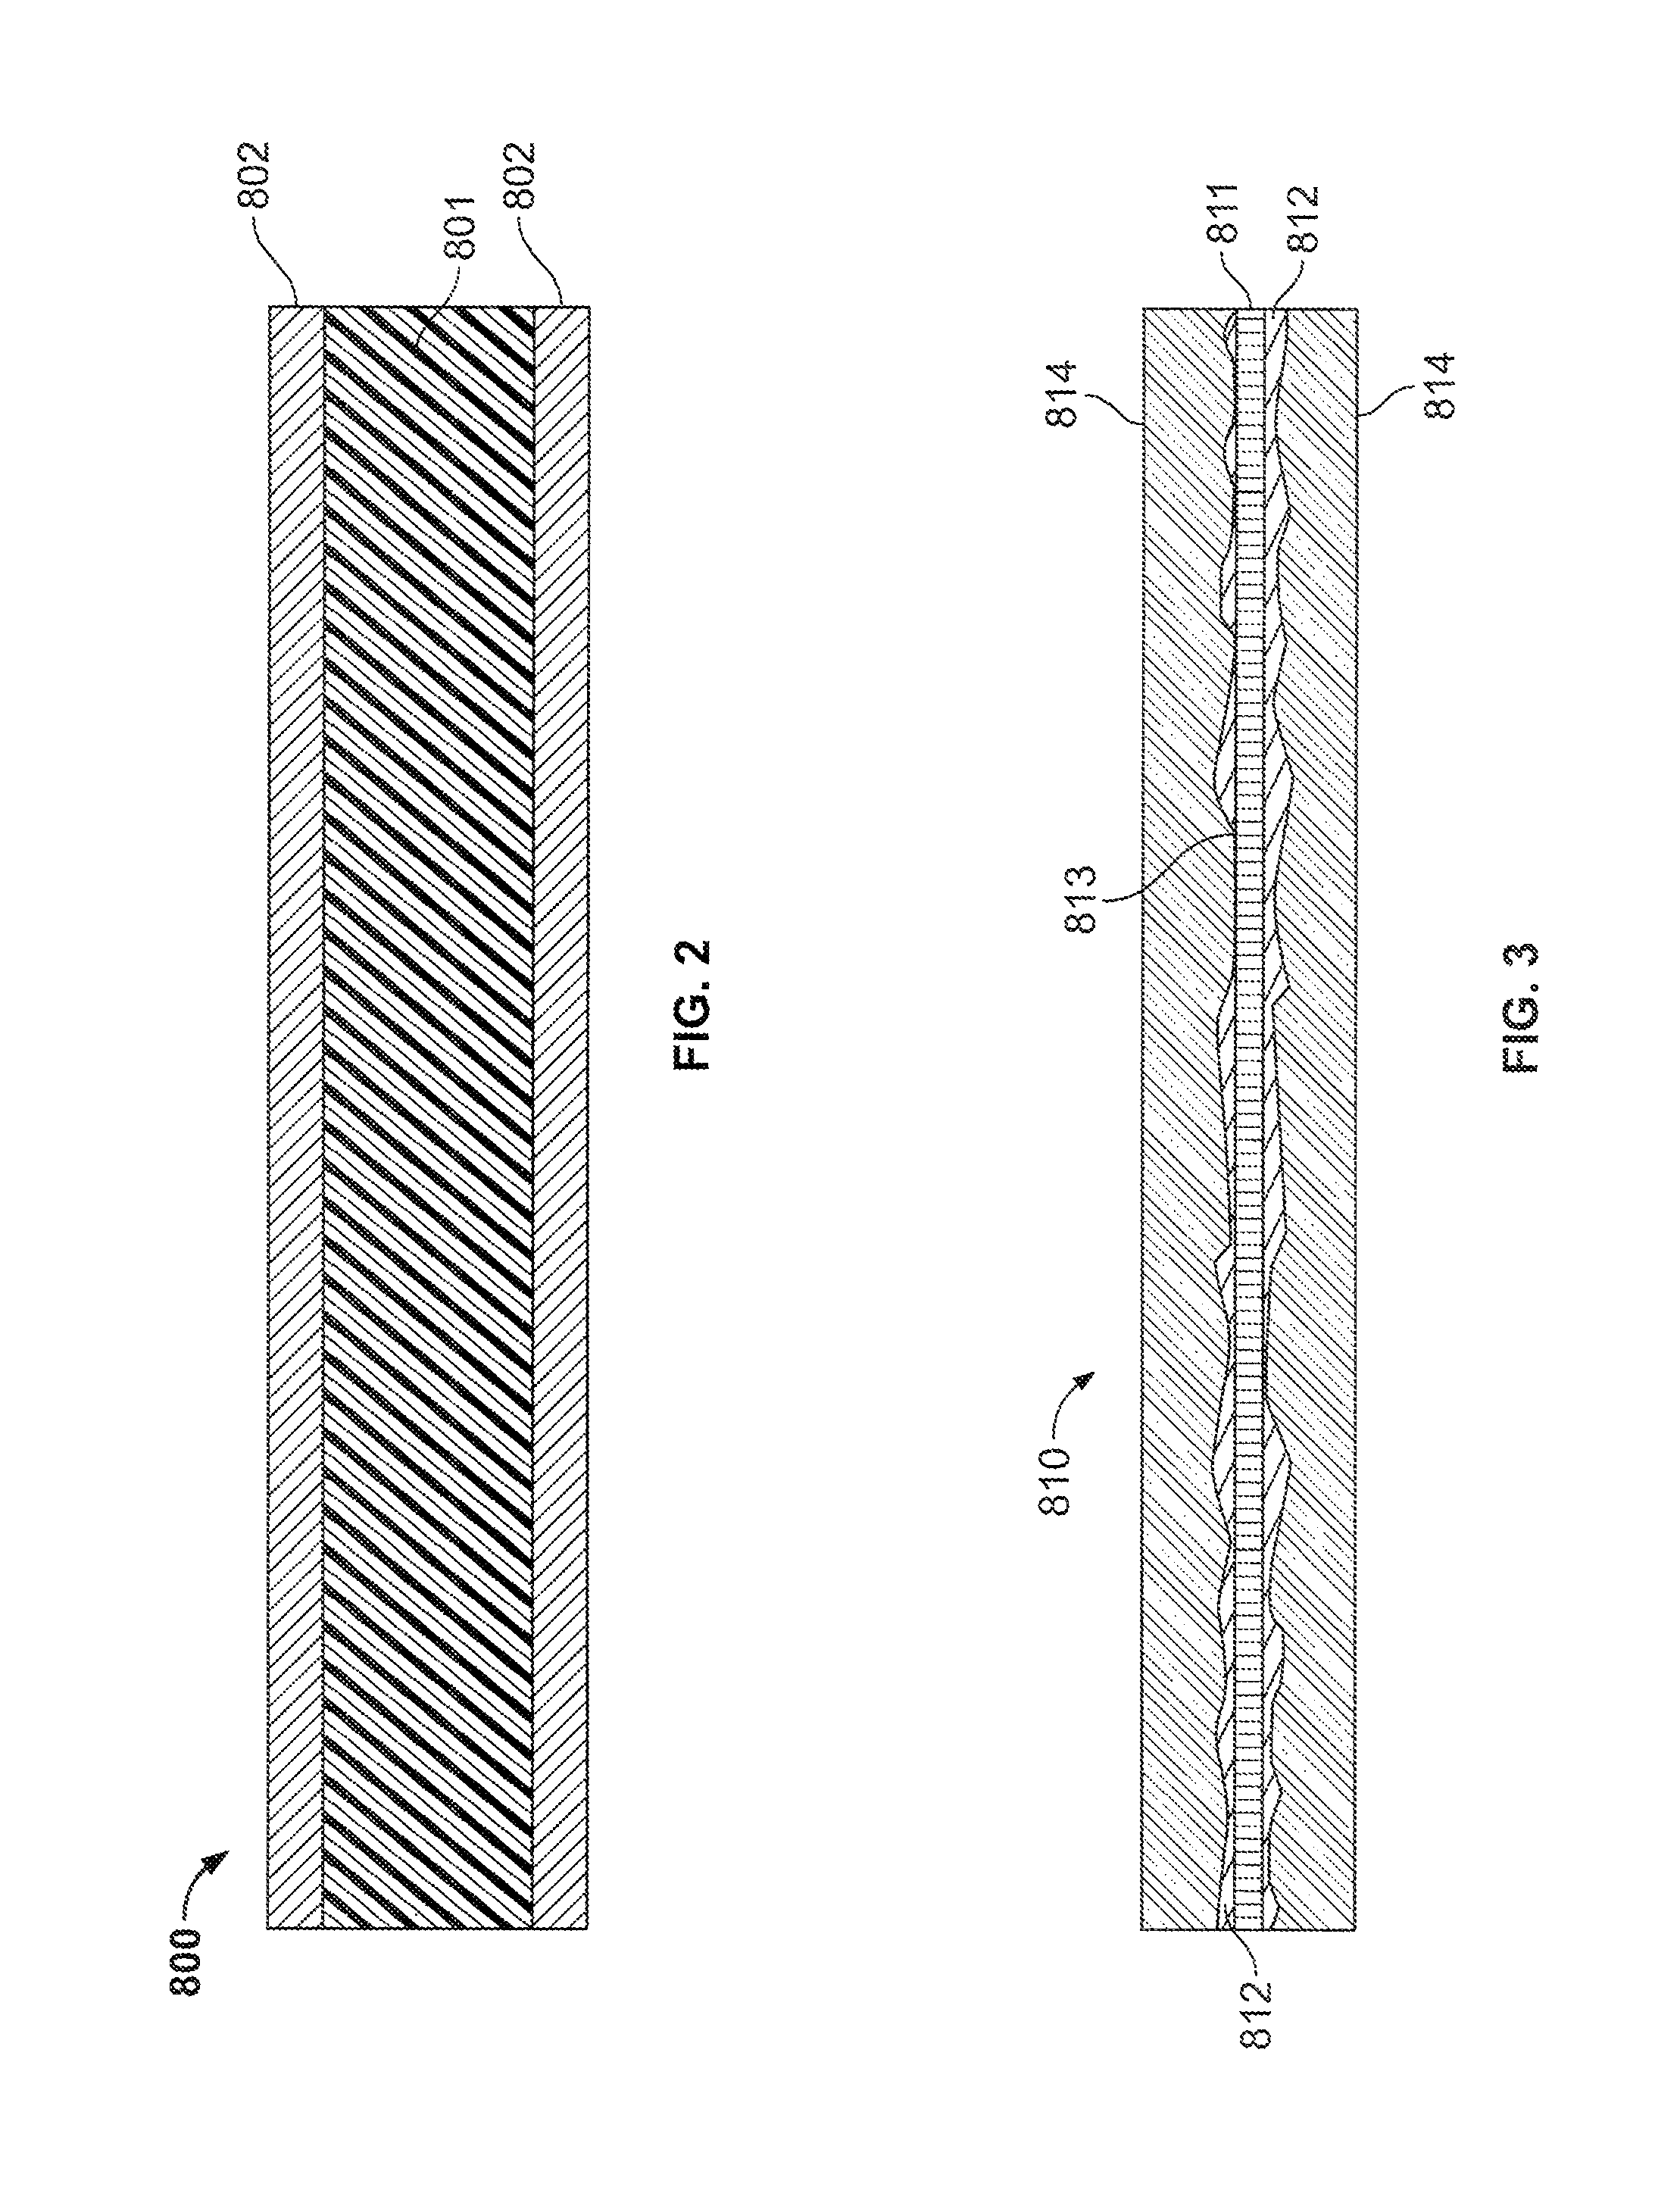 Computing floating-point polynomials in an integrated circuit device